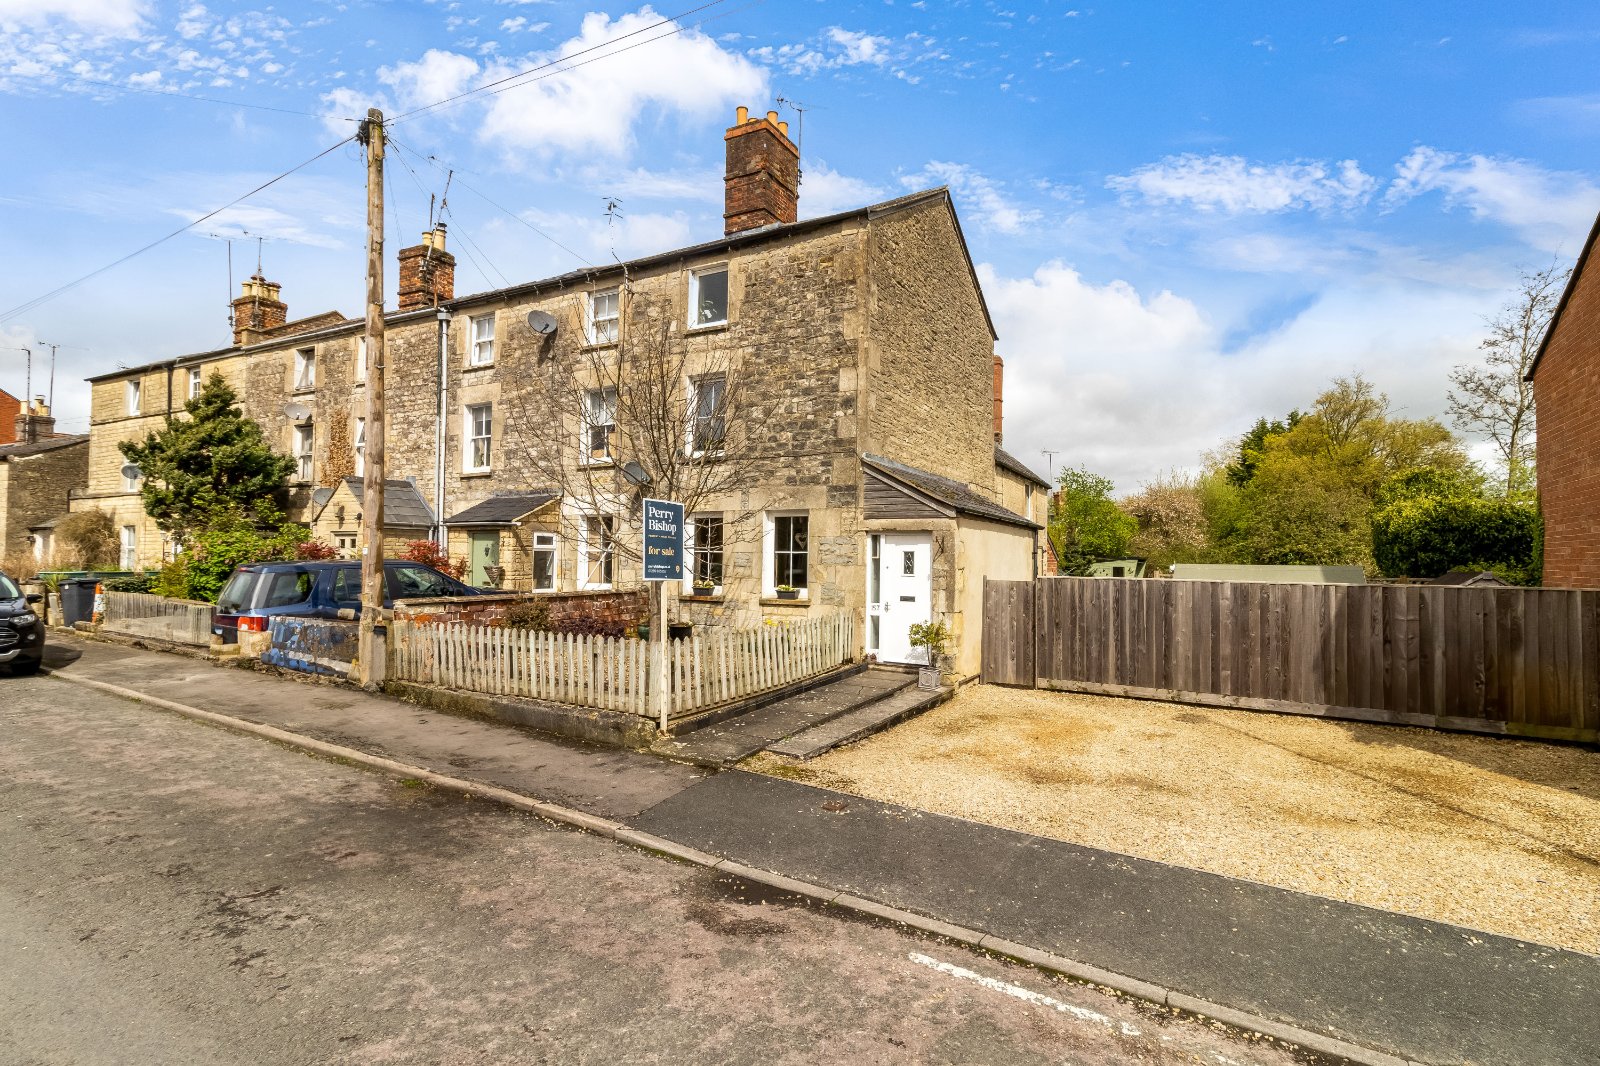 Watermoor Road, Cirencester, Gloucestershire, GL7